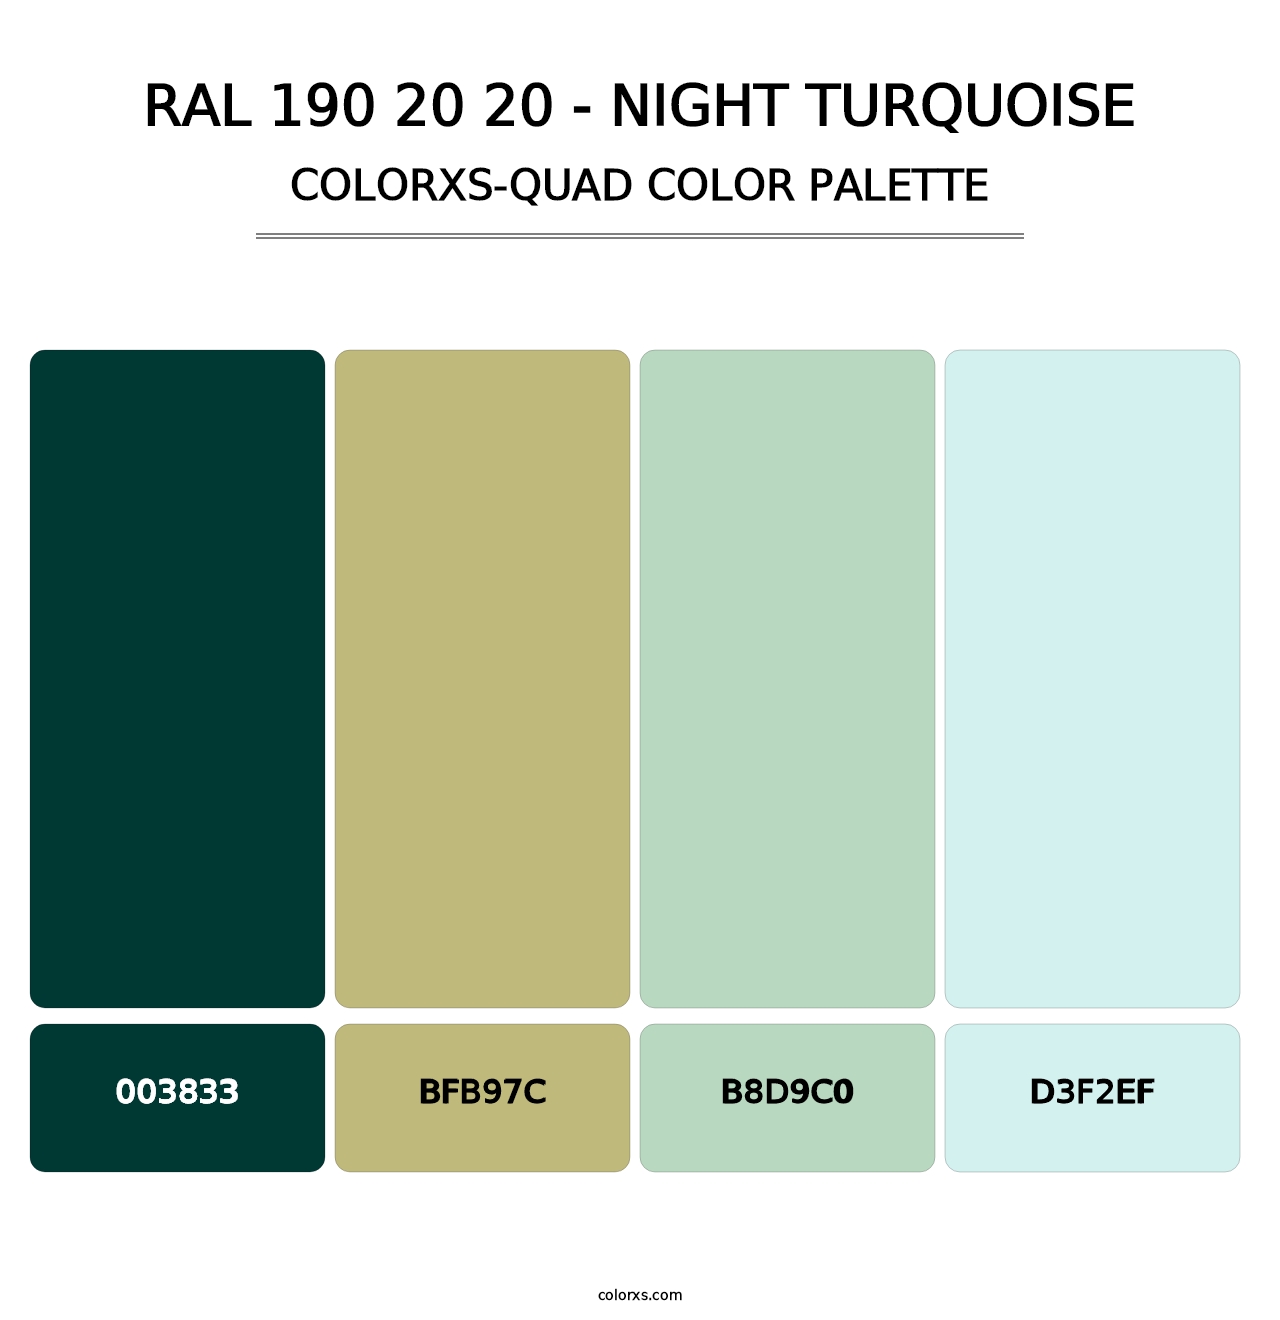 RAL 190 20 20 - Night Turquoise - Colorxs Quad Palette